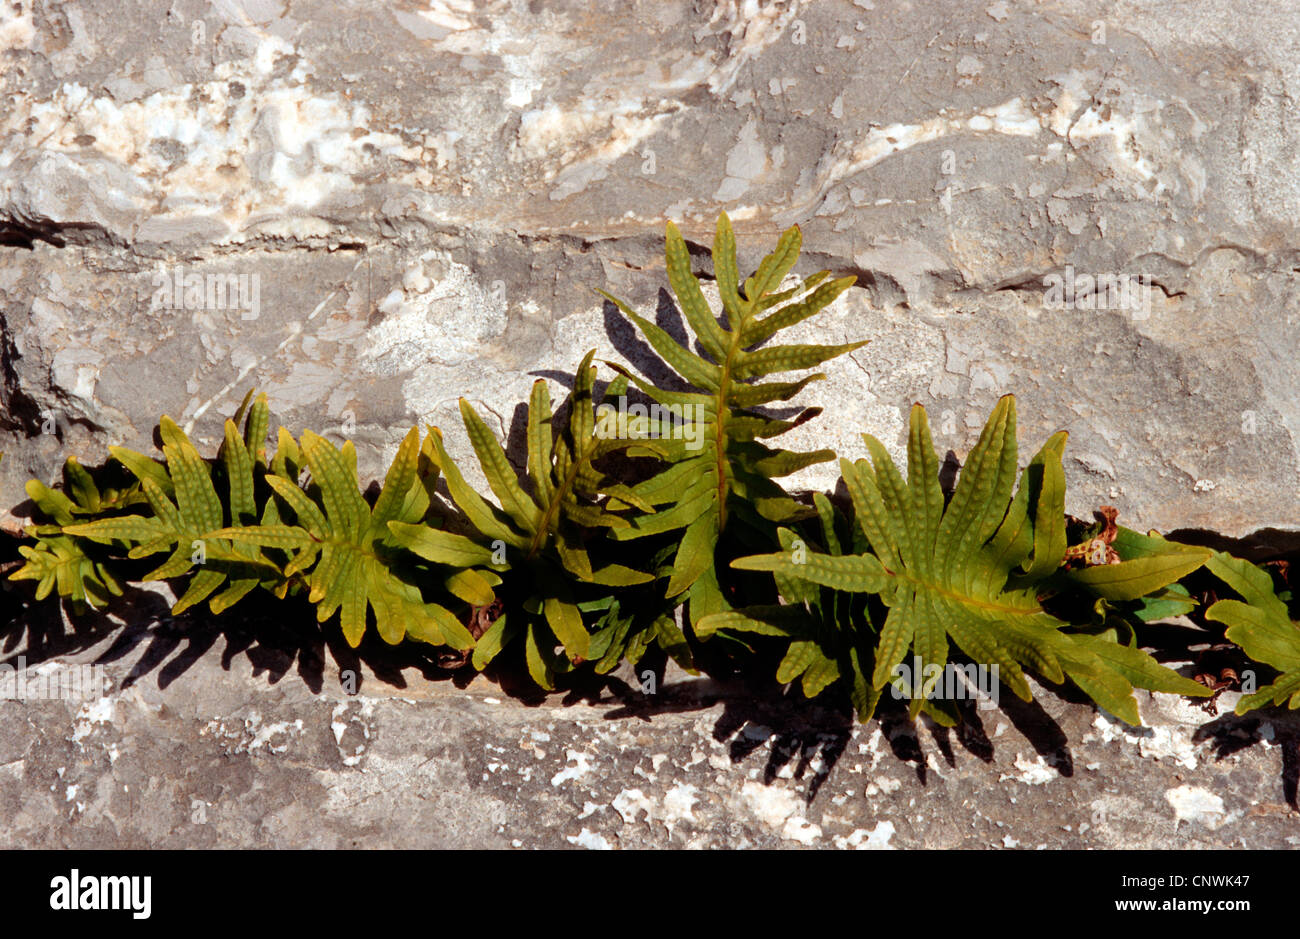 southern polypody (Polypodium cambricum, Polypodium australe), in a rock crevice Stock Photo